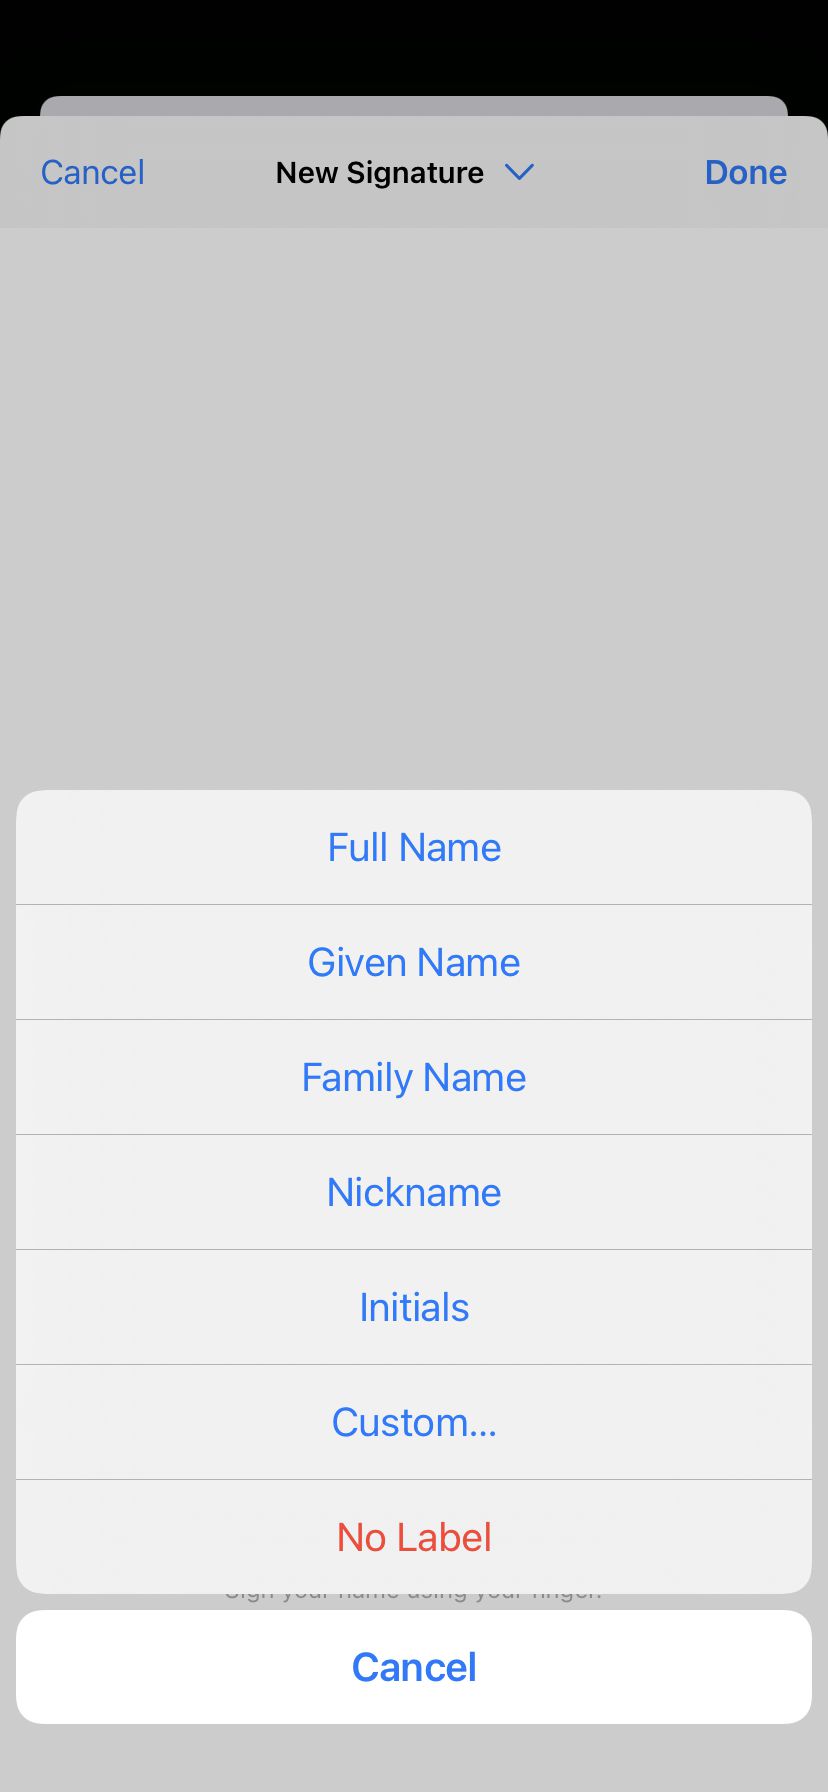 You can label your saved signature.